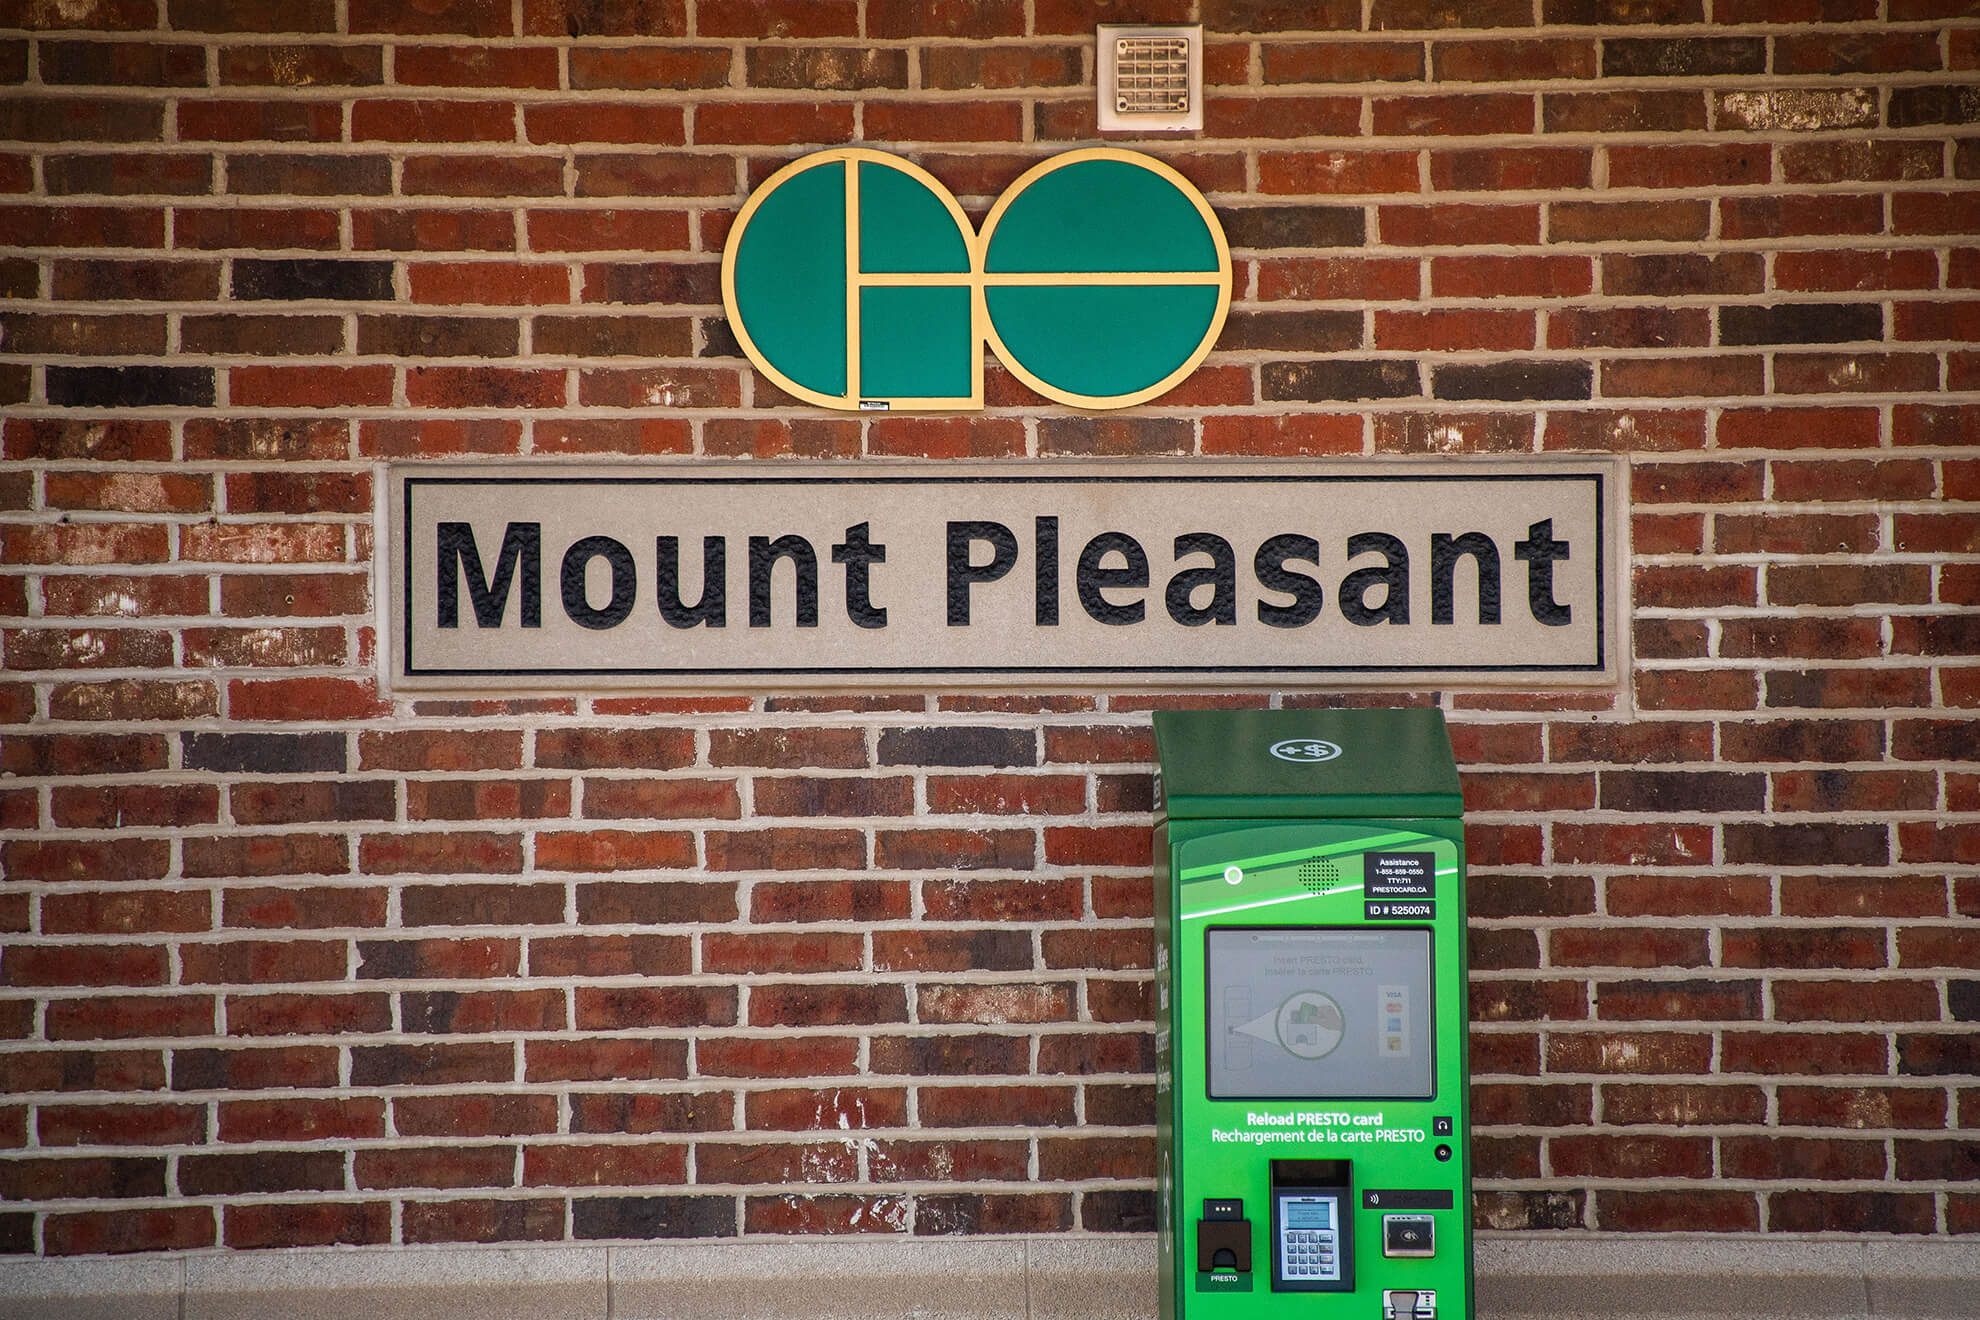 Mount Pleasant Go Station, sign and ticket box